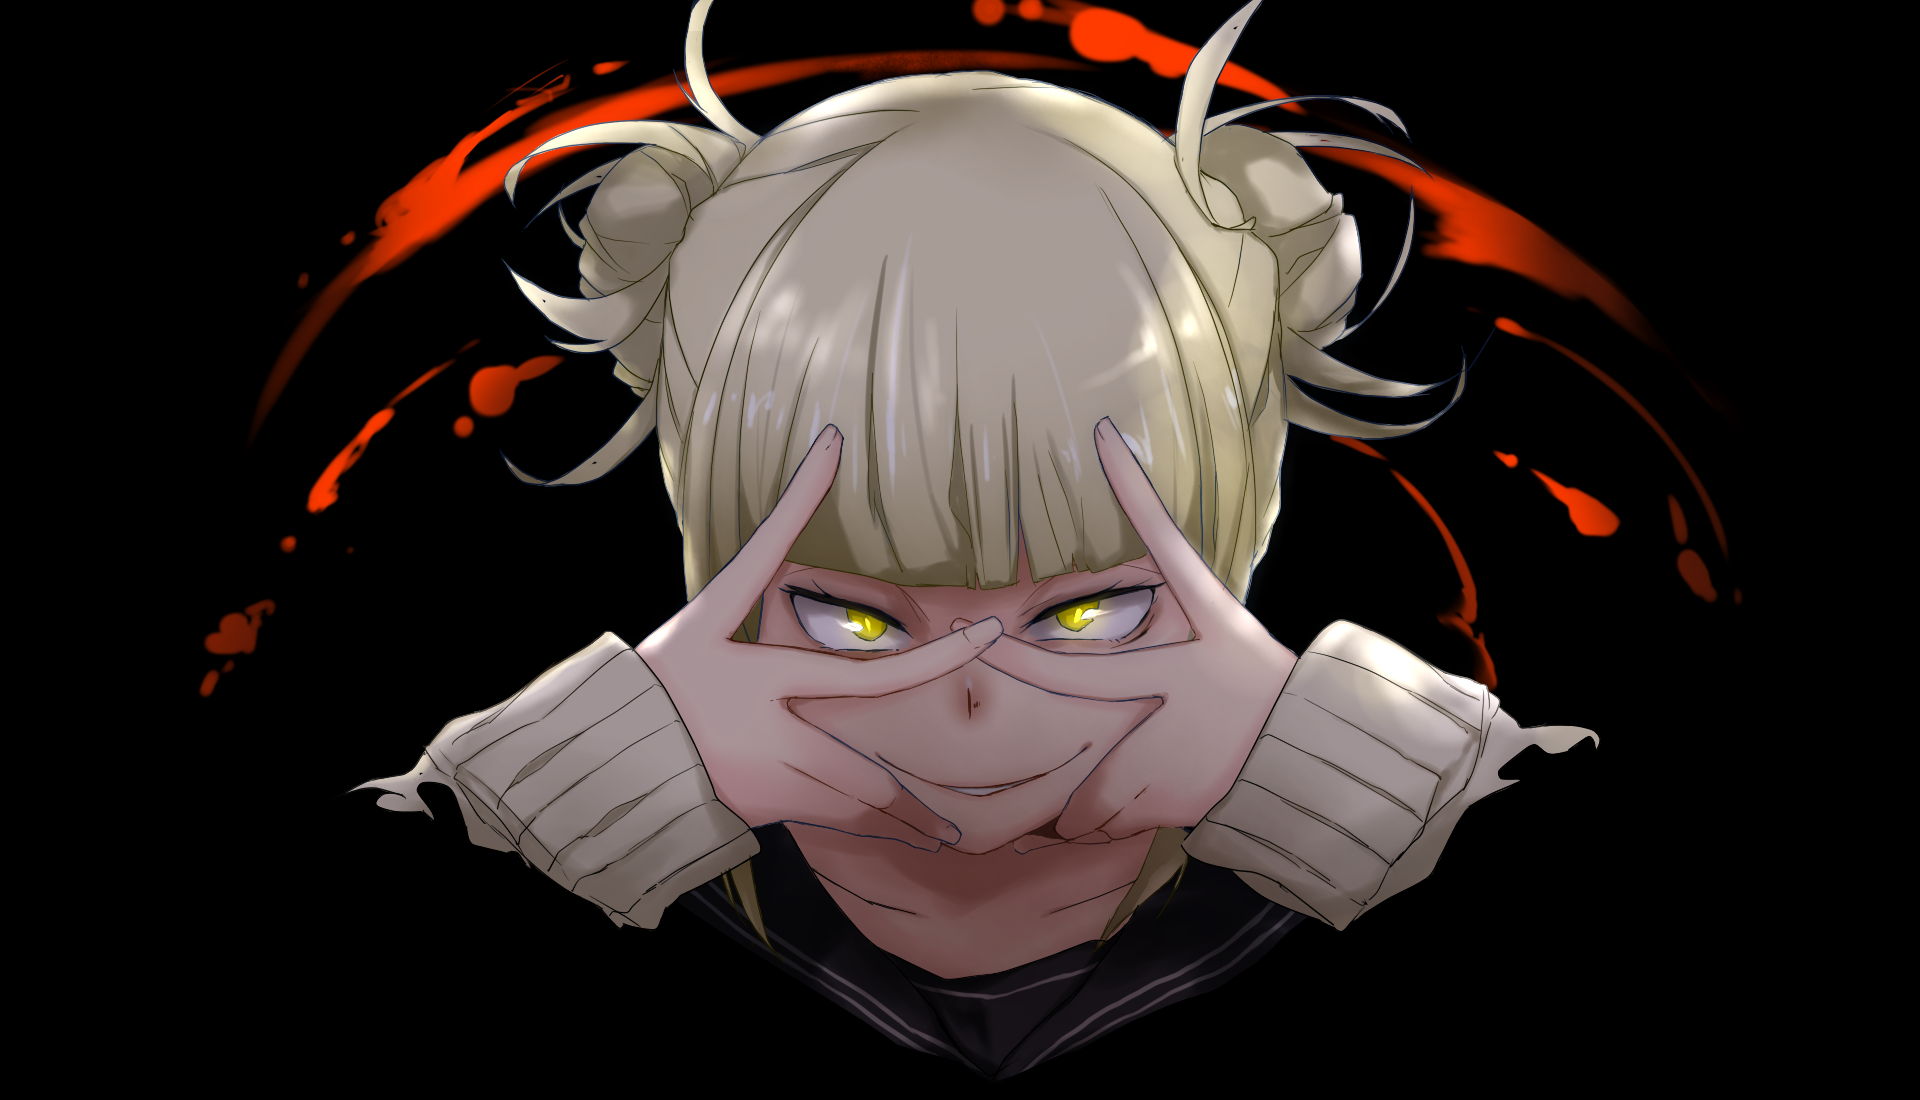 Himiko Toga Wallpapers Wallpaper Source For Free Awesome | Hot Sex Picture